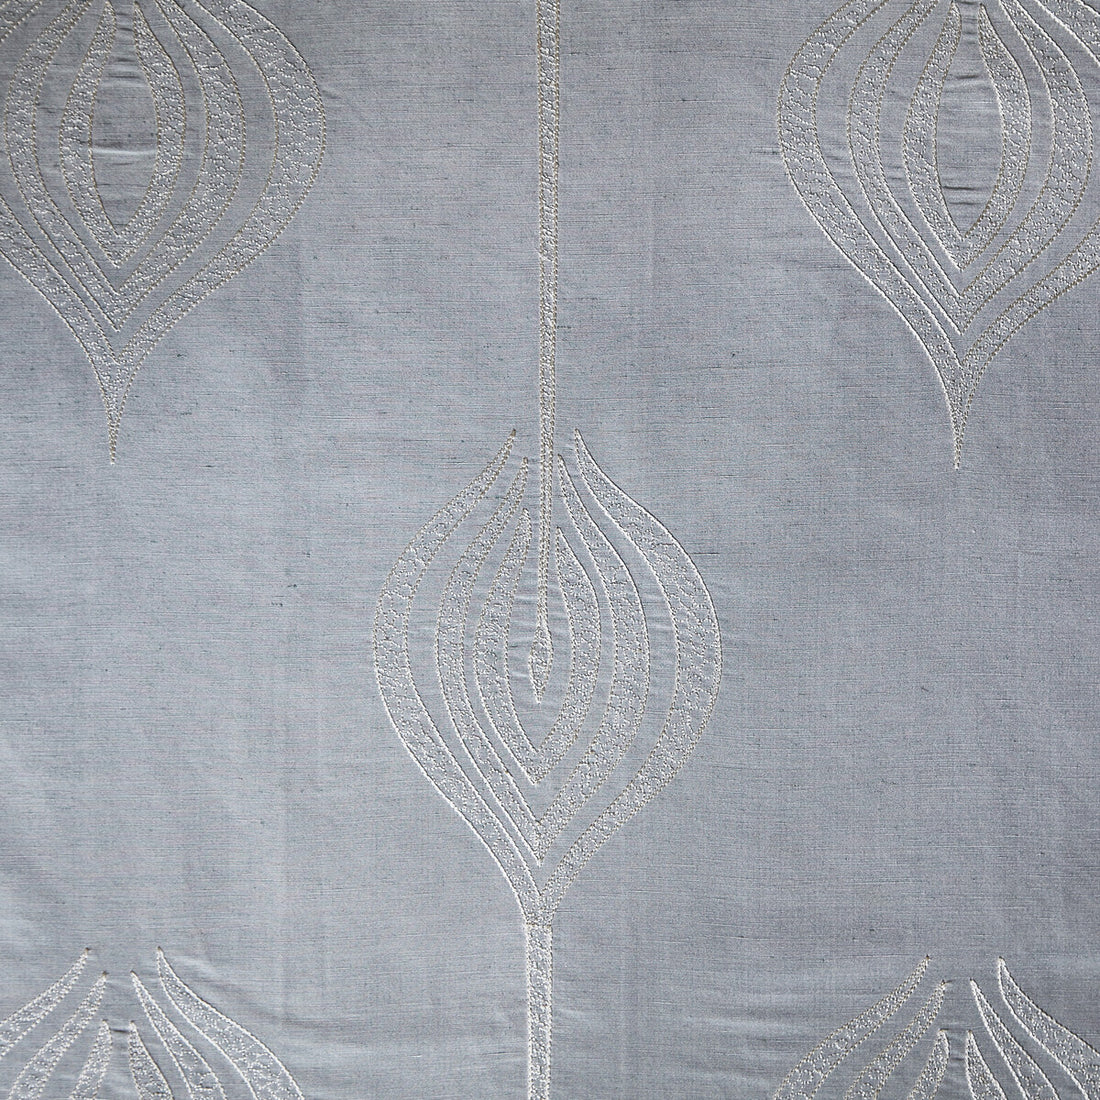 Tulip Embroidery fabric in aqua color - pattern GWF-2928.13.0 - by Lee Jofa Modern in the Allegra Hicks II collection